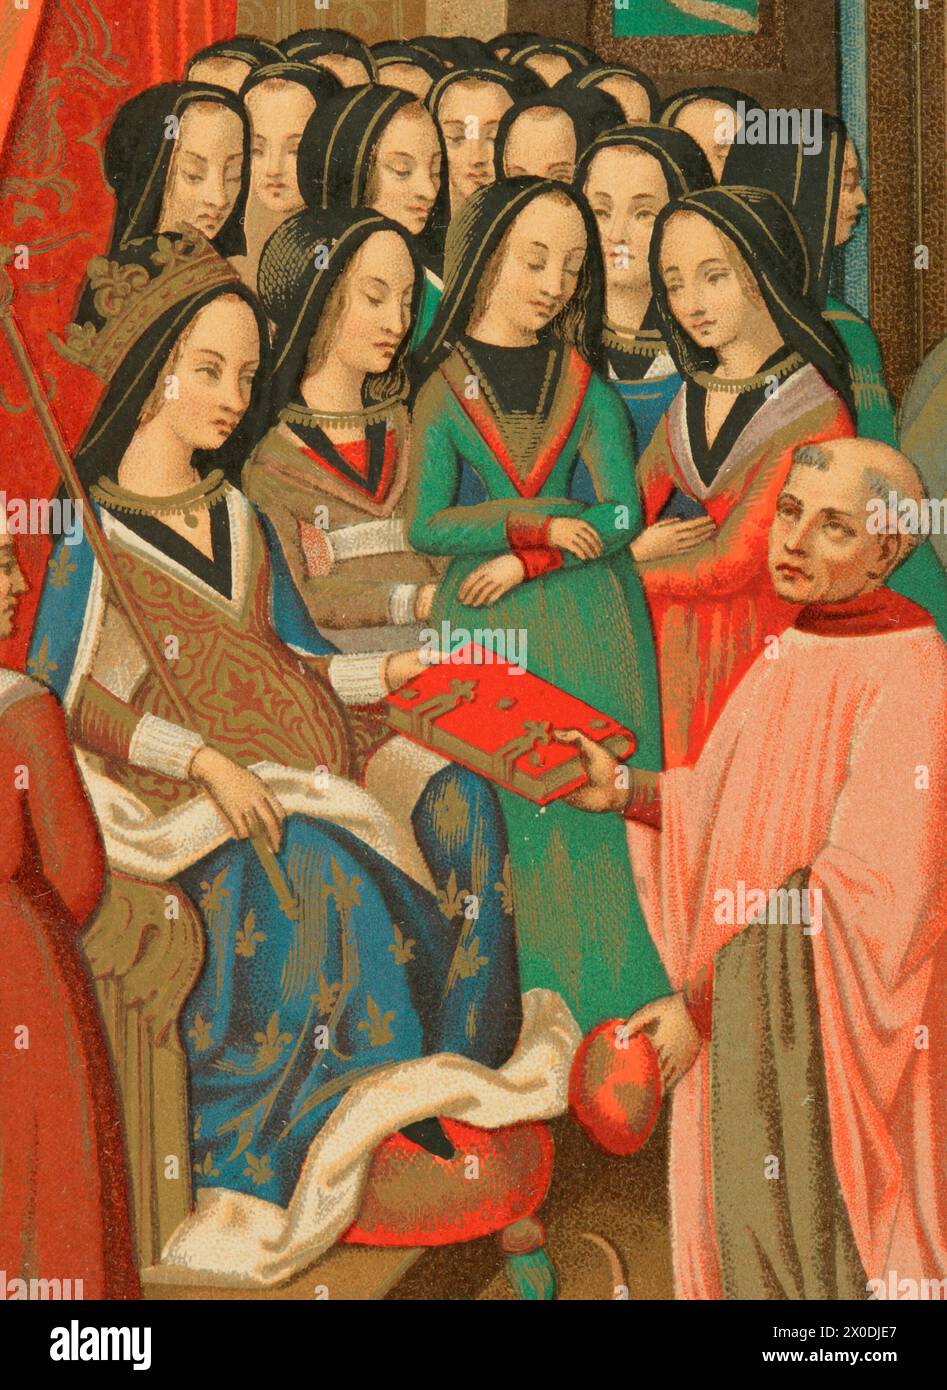 Marie of Anjou (1404-1463). Queen consort of France (1422-1461). The Court of Ladies of Marie of Anjou, wife of Charles VII. His chaplain, the scholar Robert Blondel, presents to her the allegorical treatise of the Twelve Perils of Hell which he composed for her, 1455. Chromolithography from a miniature of that book. Detail. 'Moeurs, usages et costumes au moyen-âge et à l'époque de la Renaissance', by Paul Lacroix. Paris, 1878. Stock Photo